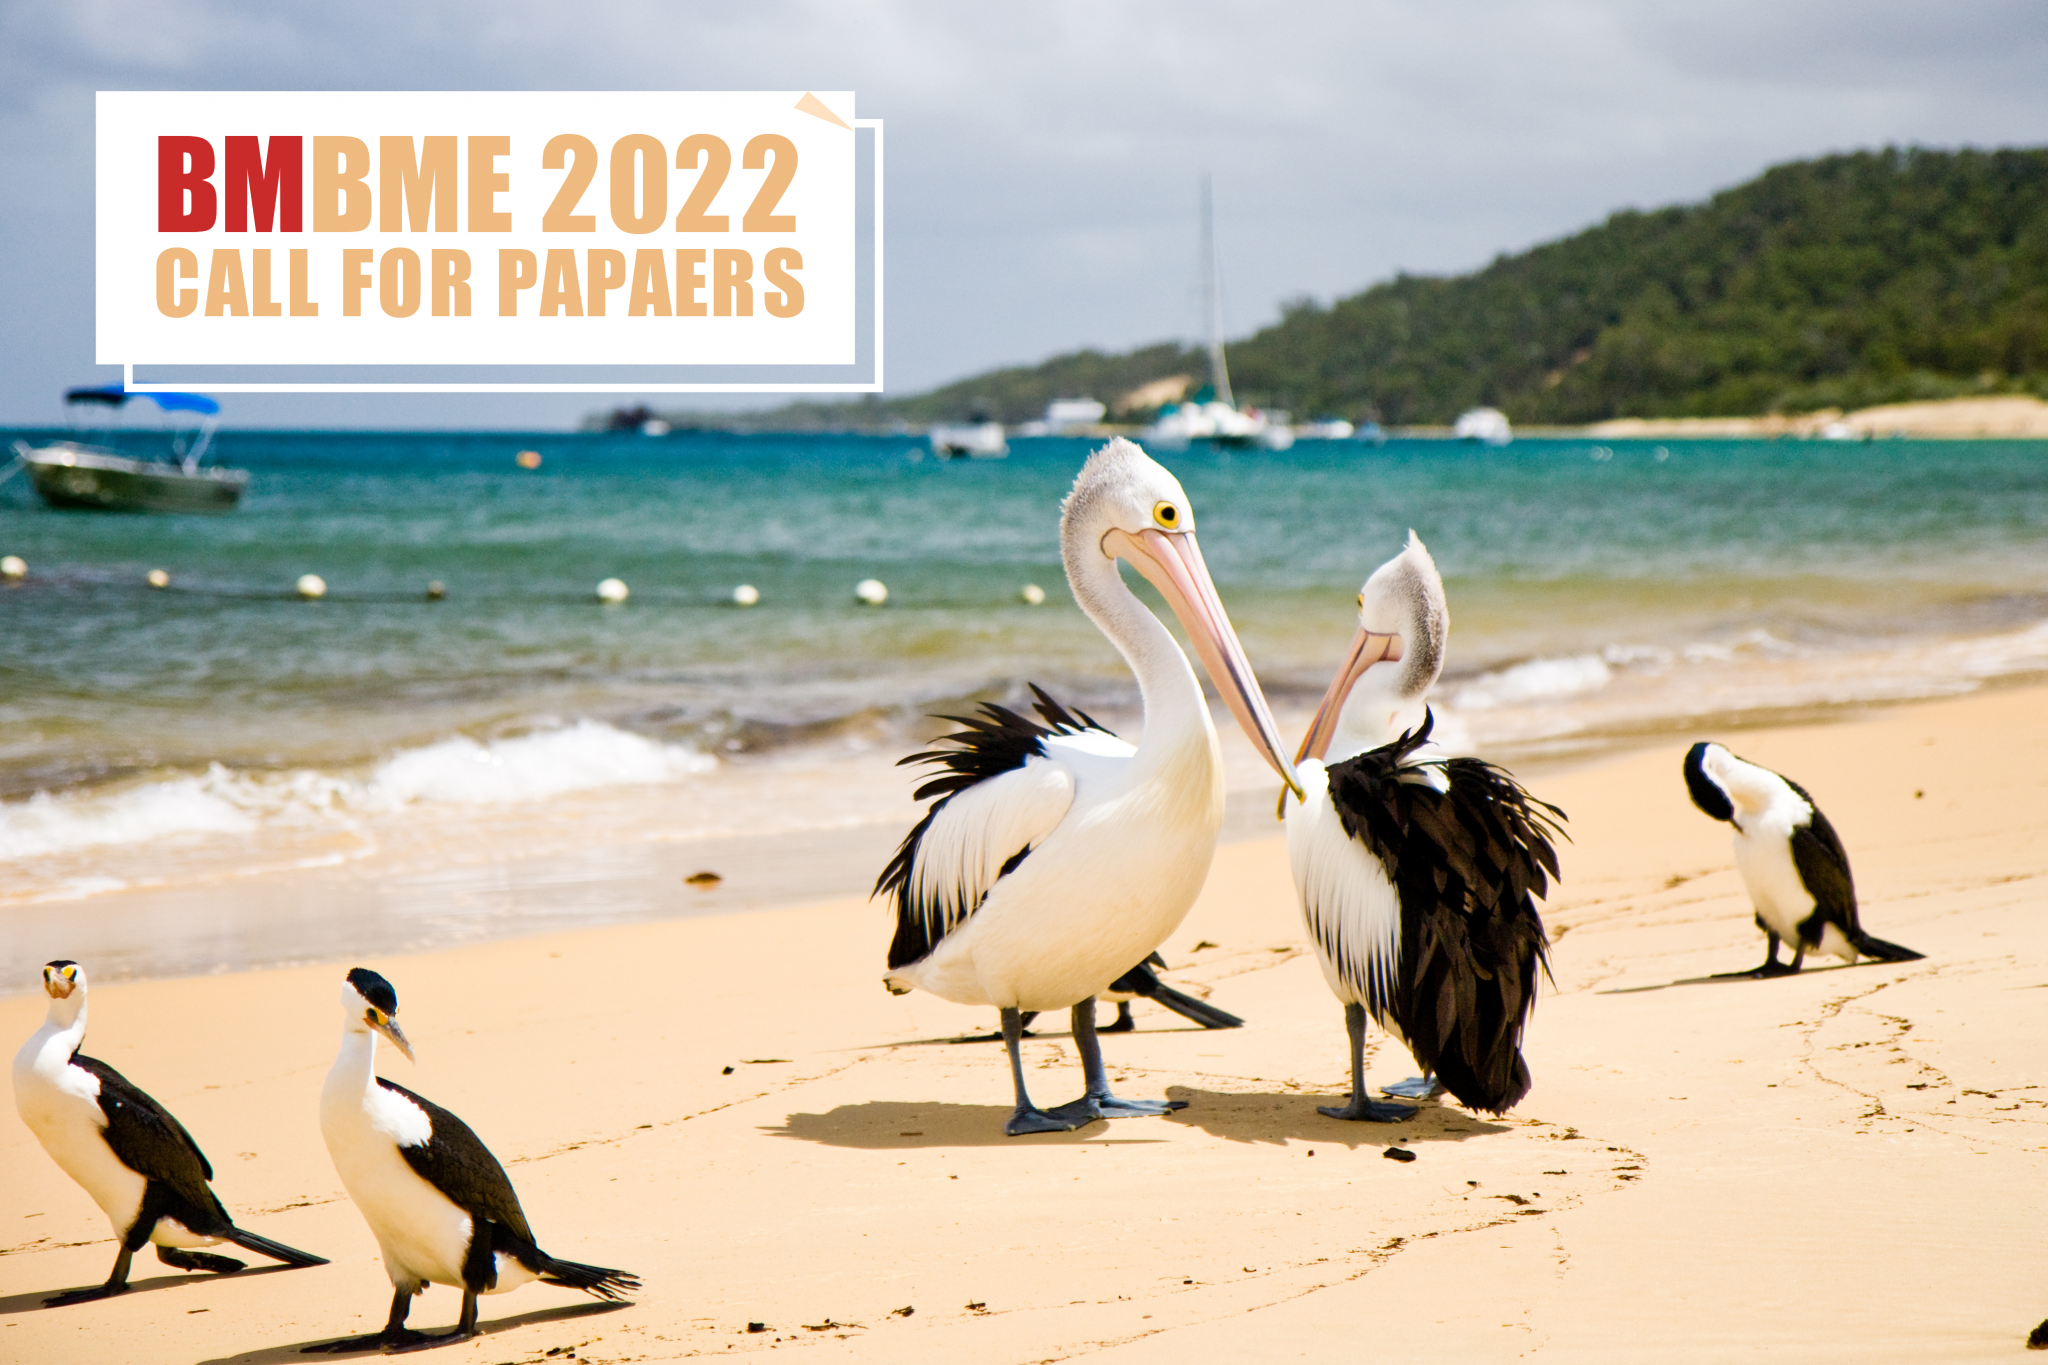 BMBME2022 Call for Papers